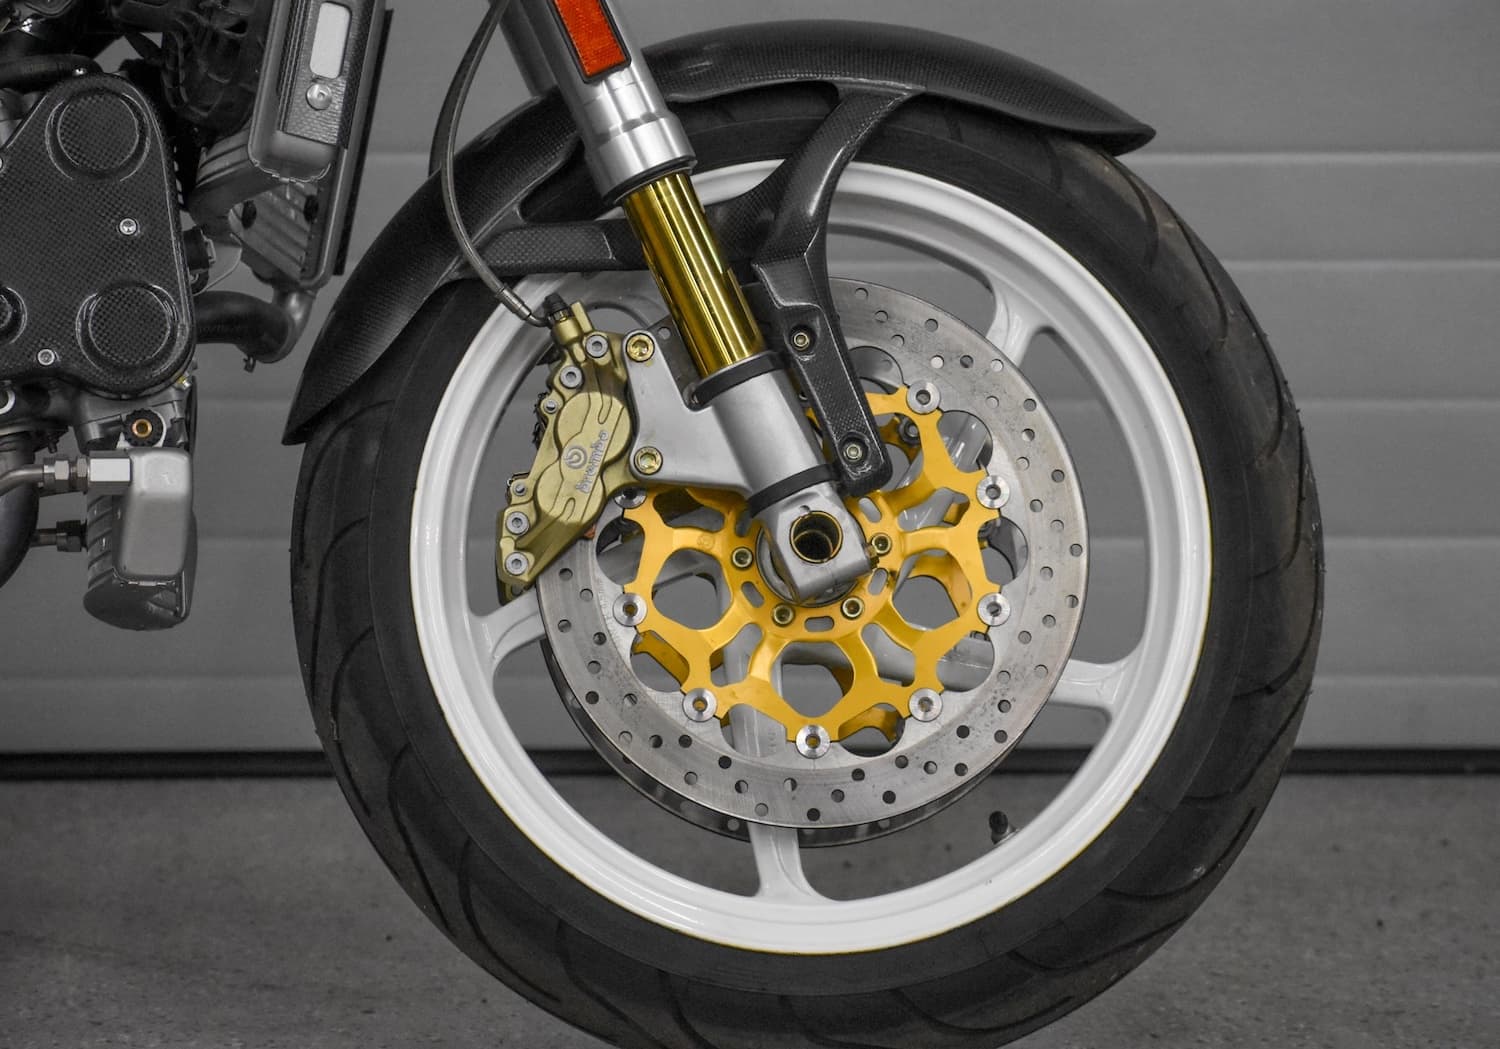 Ducati Monster S4R front wheel and suspension